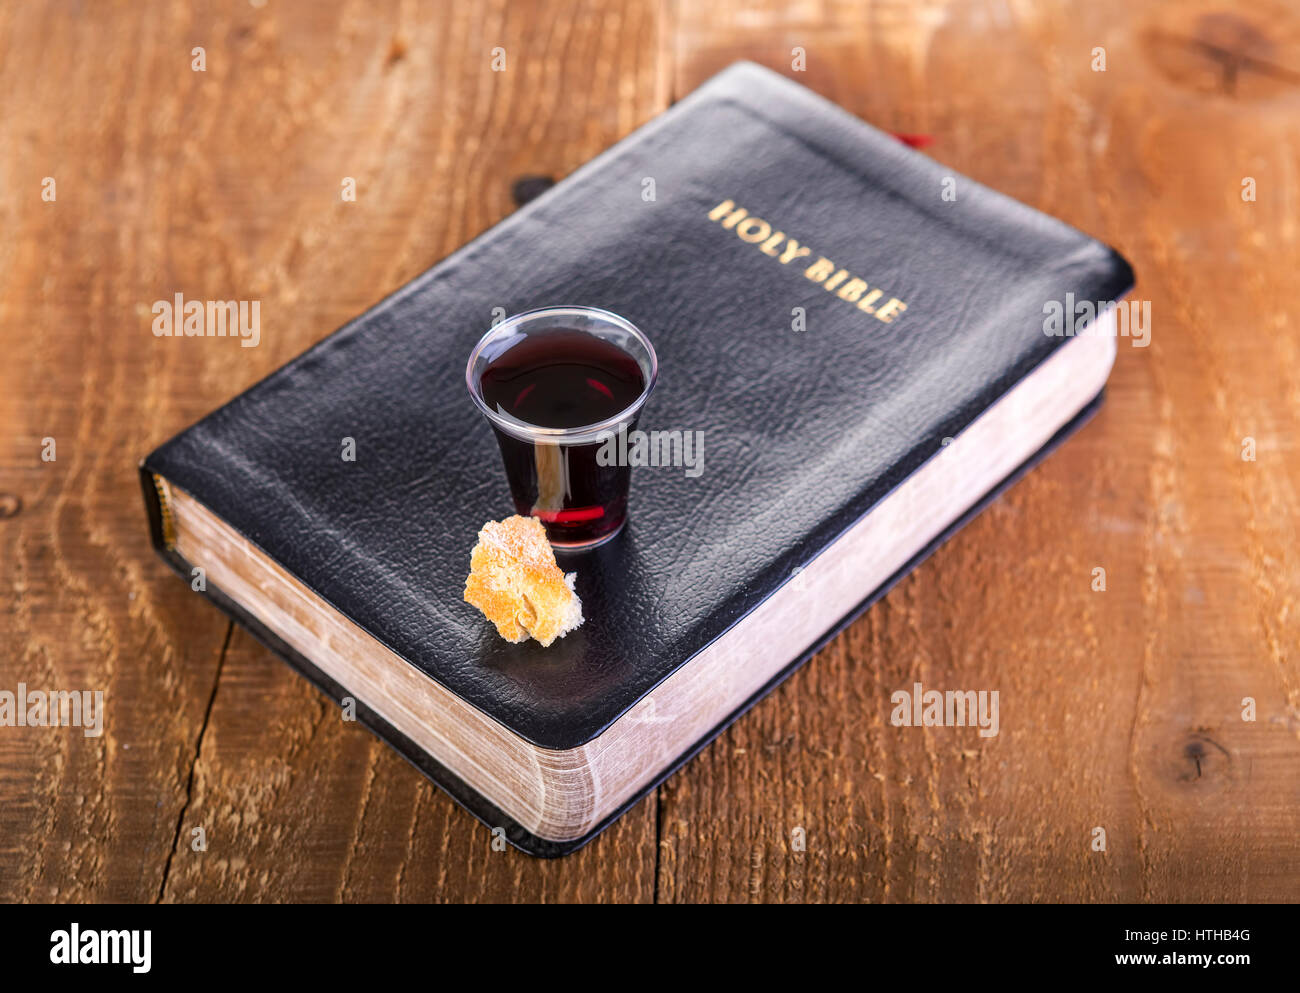 Taking Communion. Cup of glass with red wine, bread and Holy Bible on wooden table close-up. Focus on glass Stock Photo